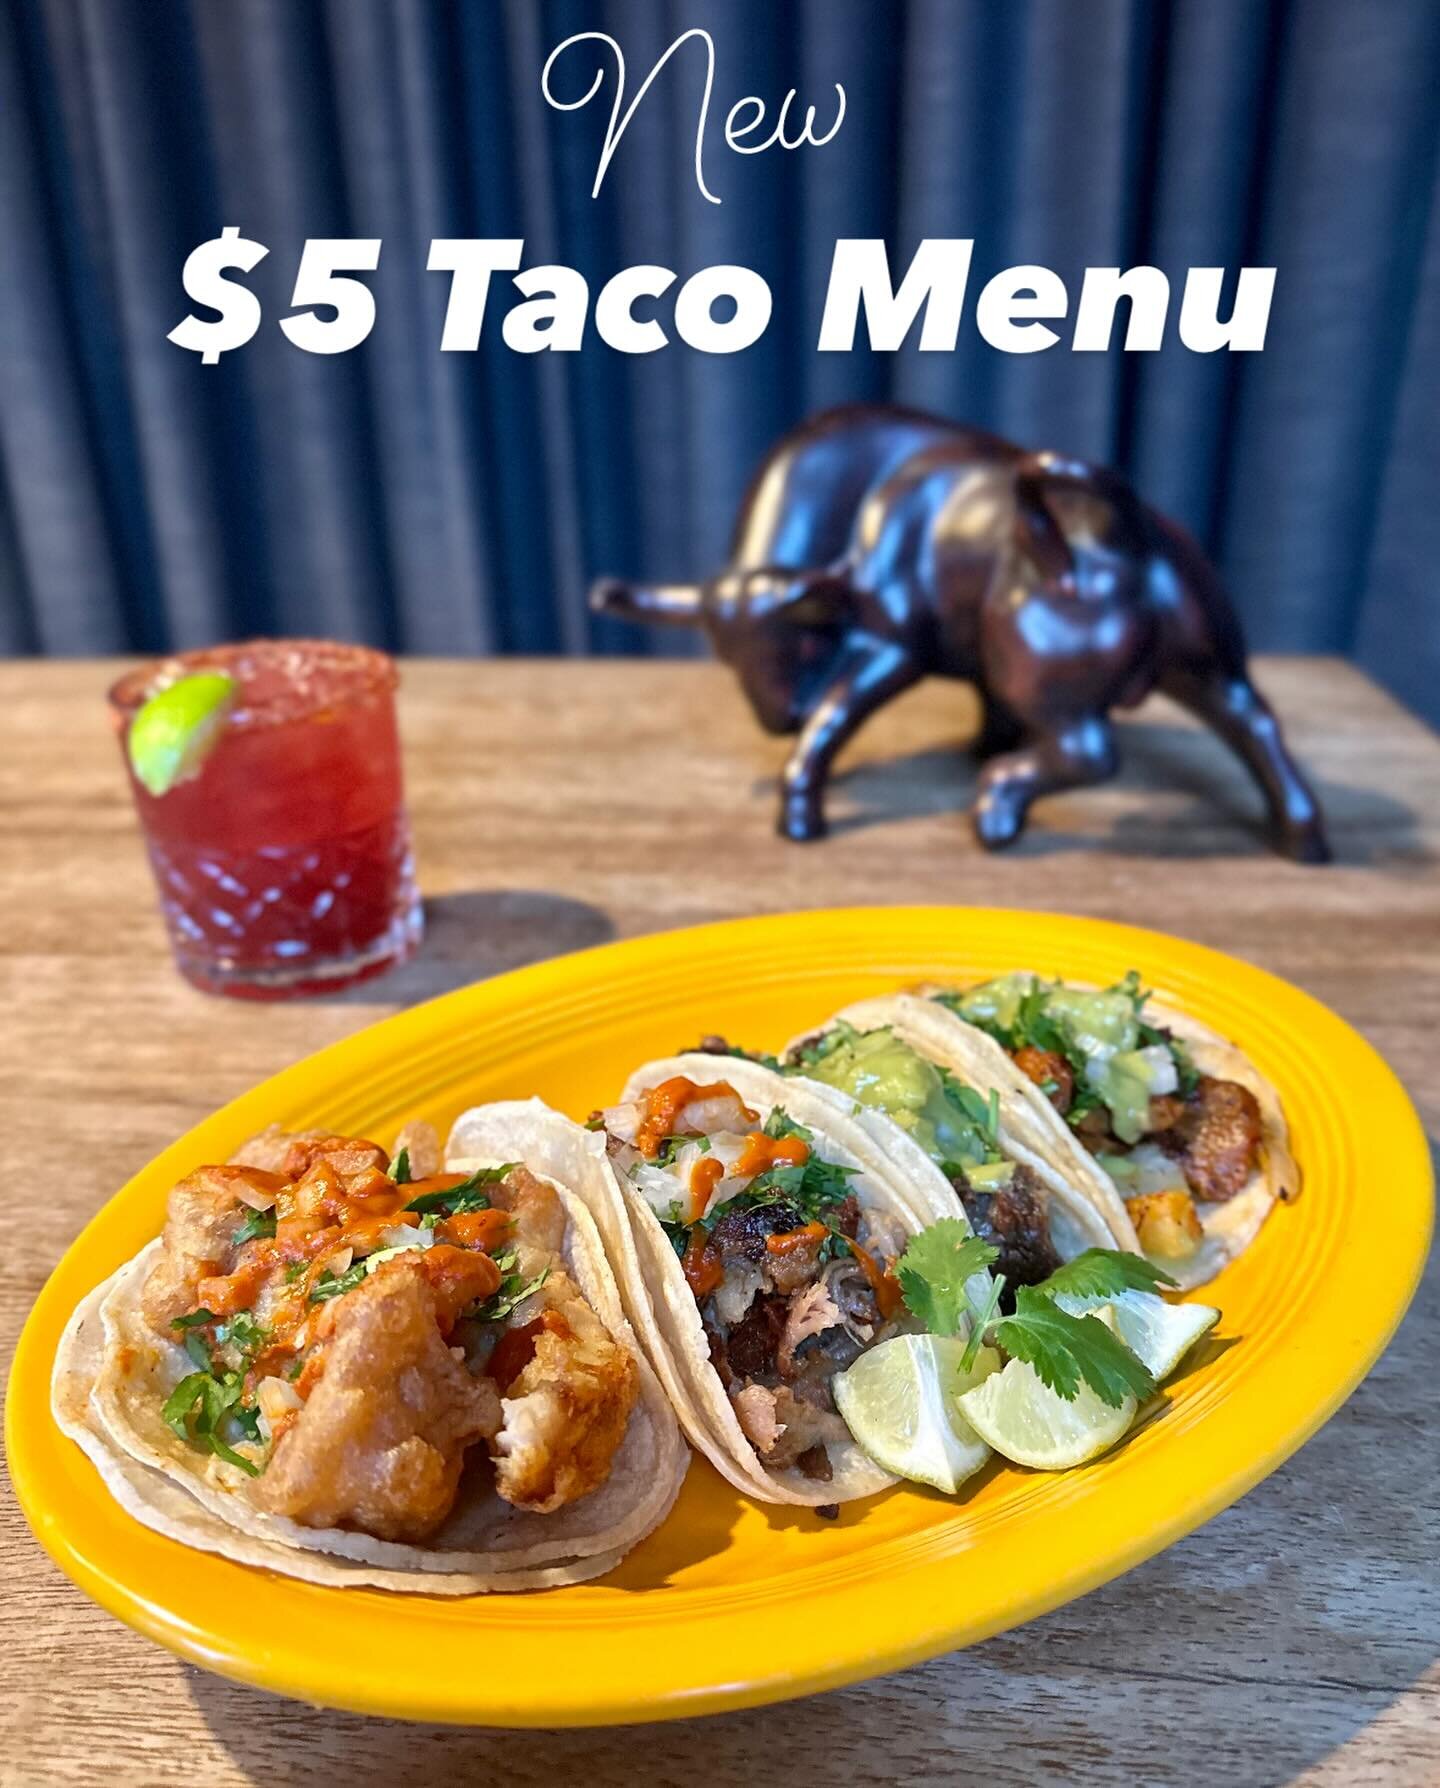 New $5 TACO MENU! All tacos can now be ordered solo for $5 anytime. This is a chance to order small and try more off the menu 🌮. Family-style, build your own tacos are still available too :)

Come belly up to the bar, grab a taco or two and a margar